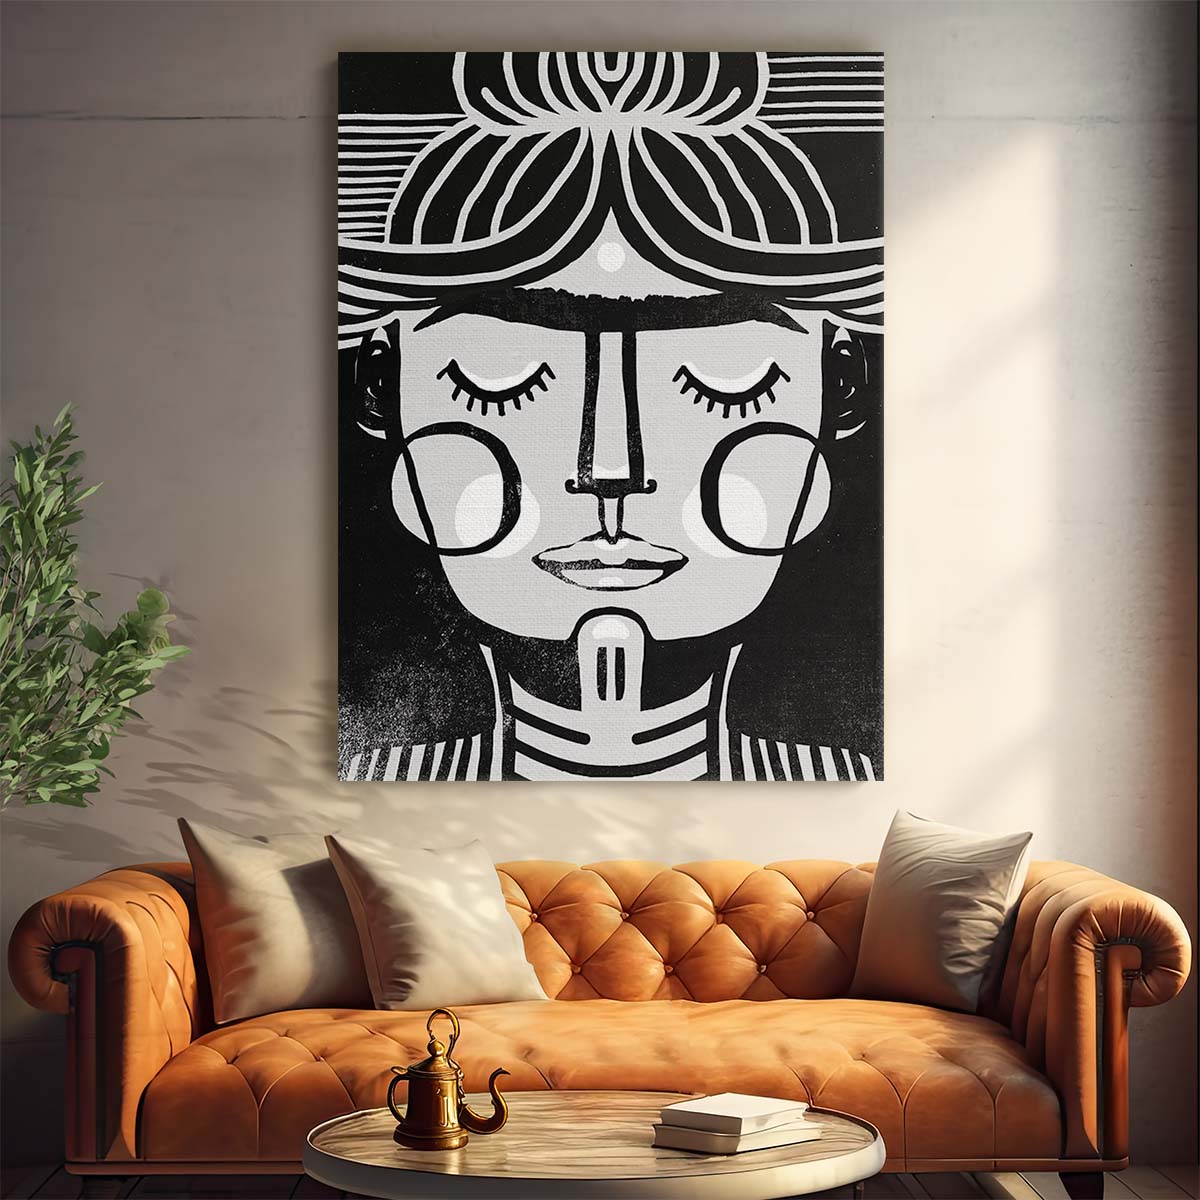 Frida Kahlo Dreaming Portrait, Monochrome Illustration Wall Art by Luxuriance Designs, made in USA